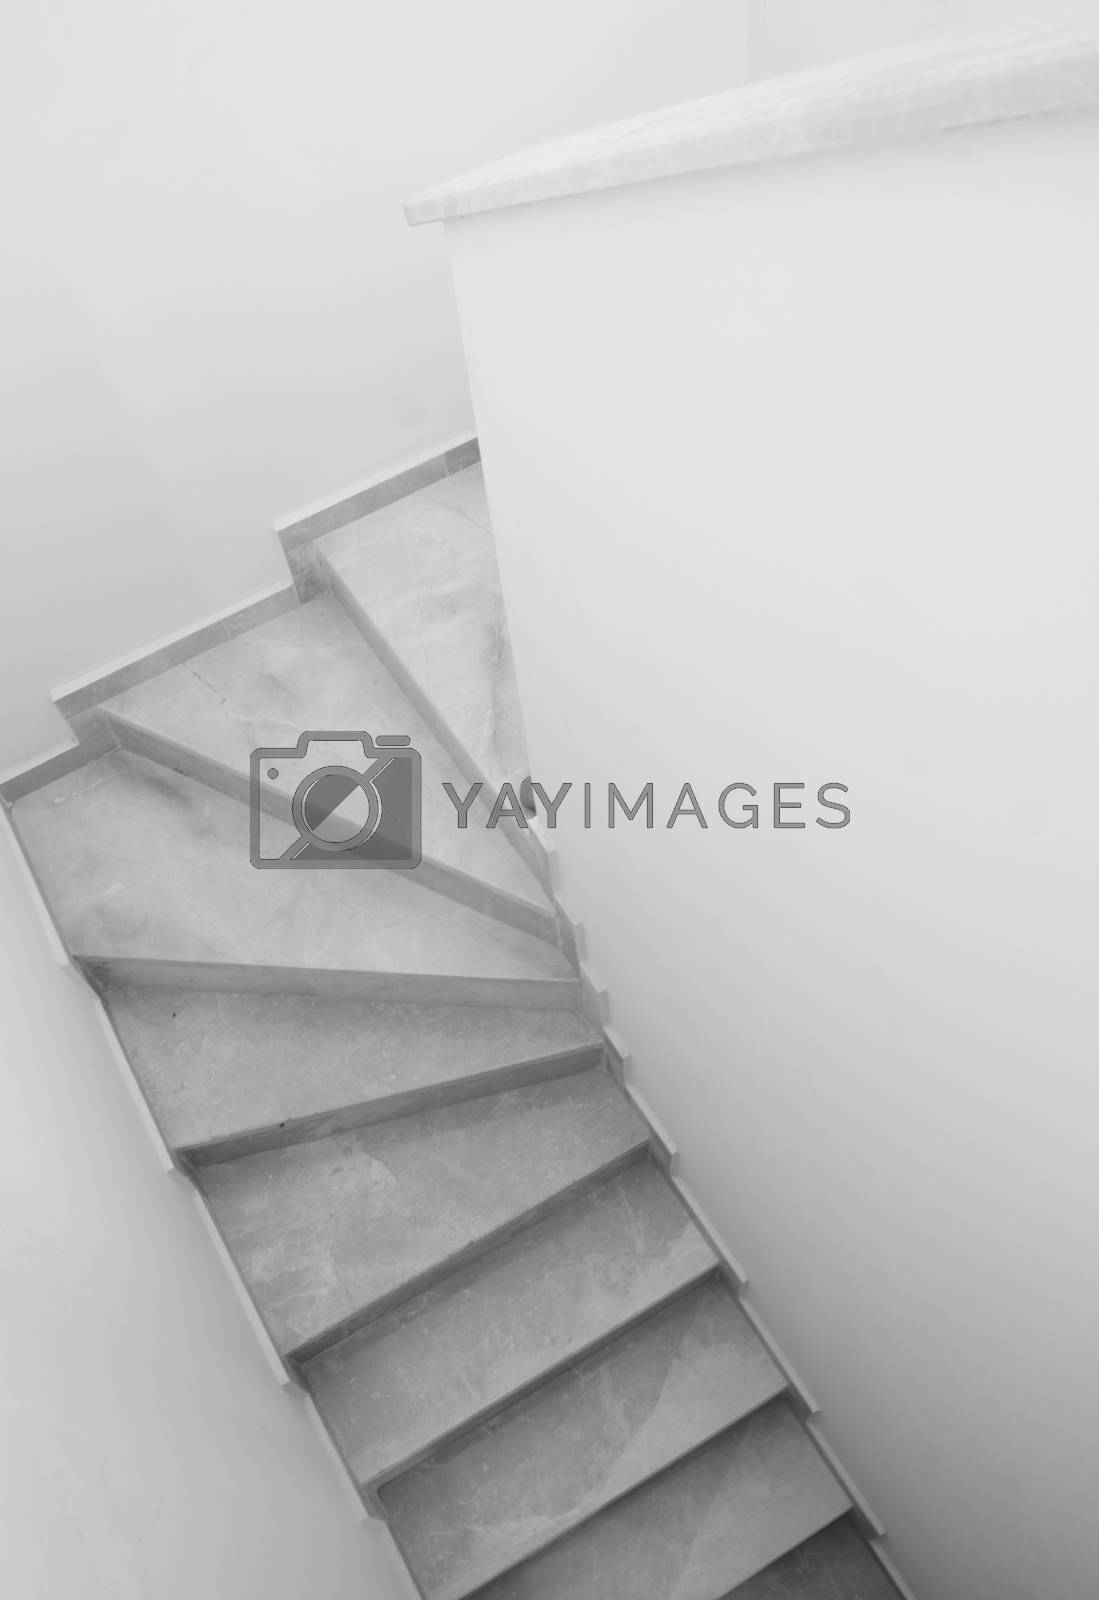 Royalty free image of Aegean architecture by Elet